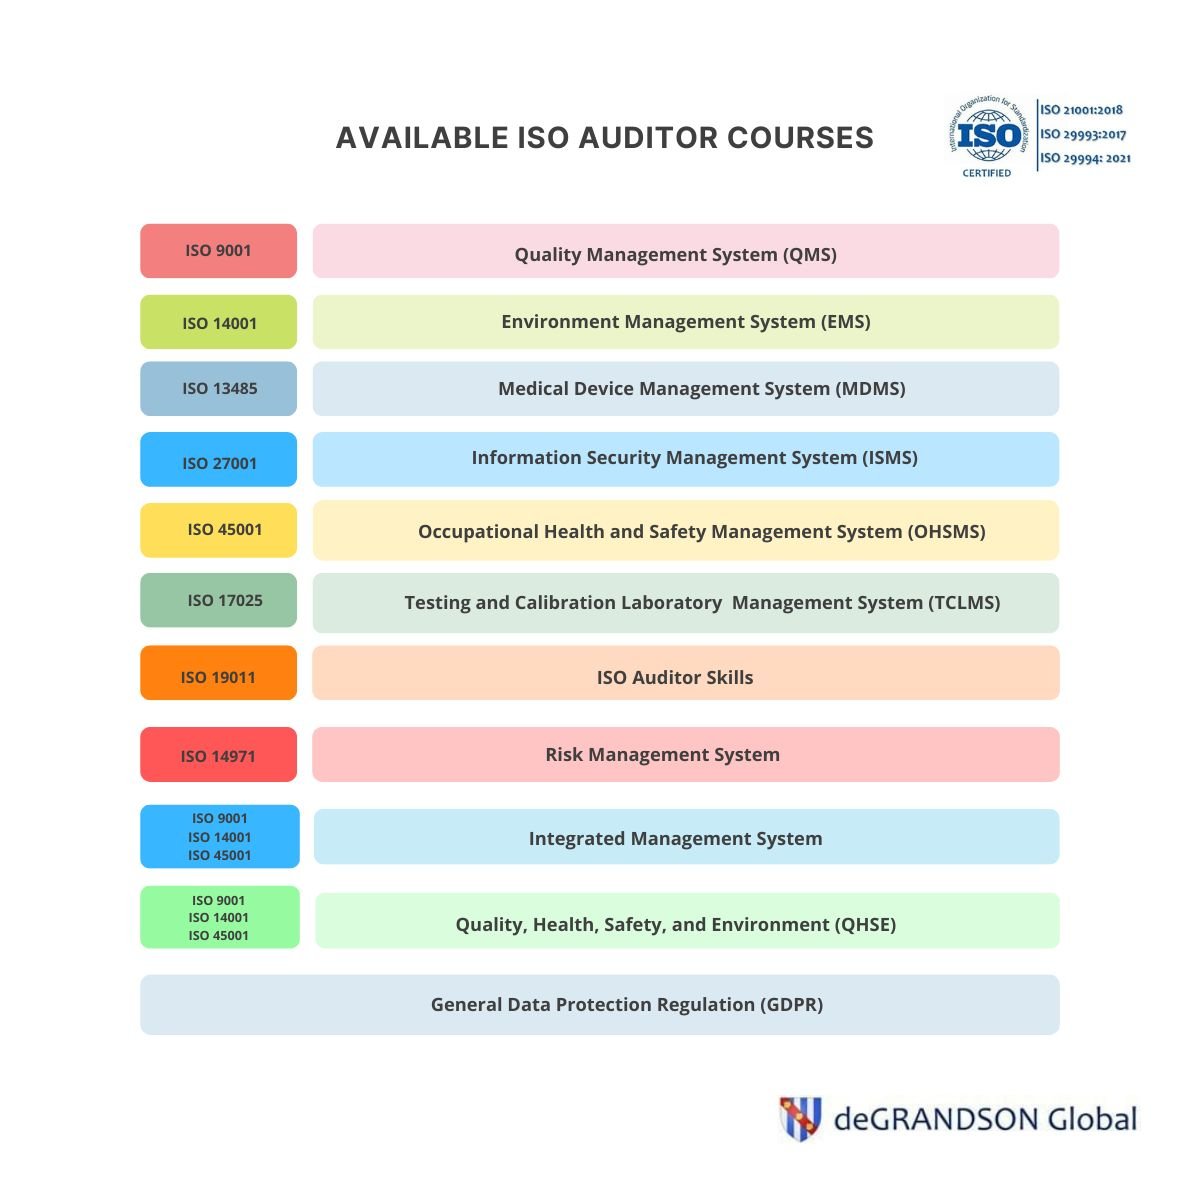 Graphic showing the ISO Auditor training and certification courses that deGRANDSON offers online